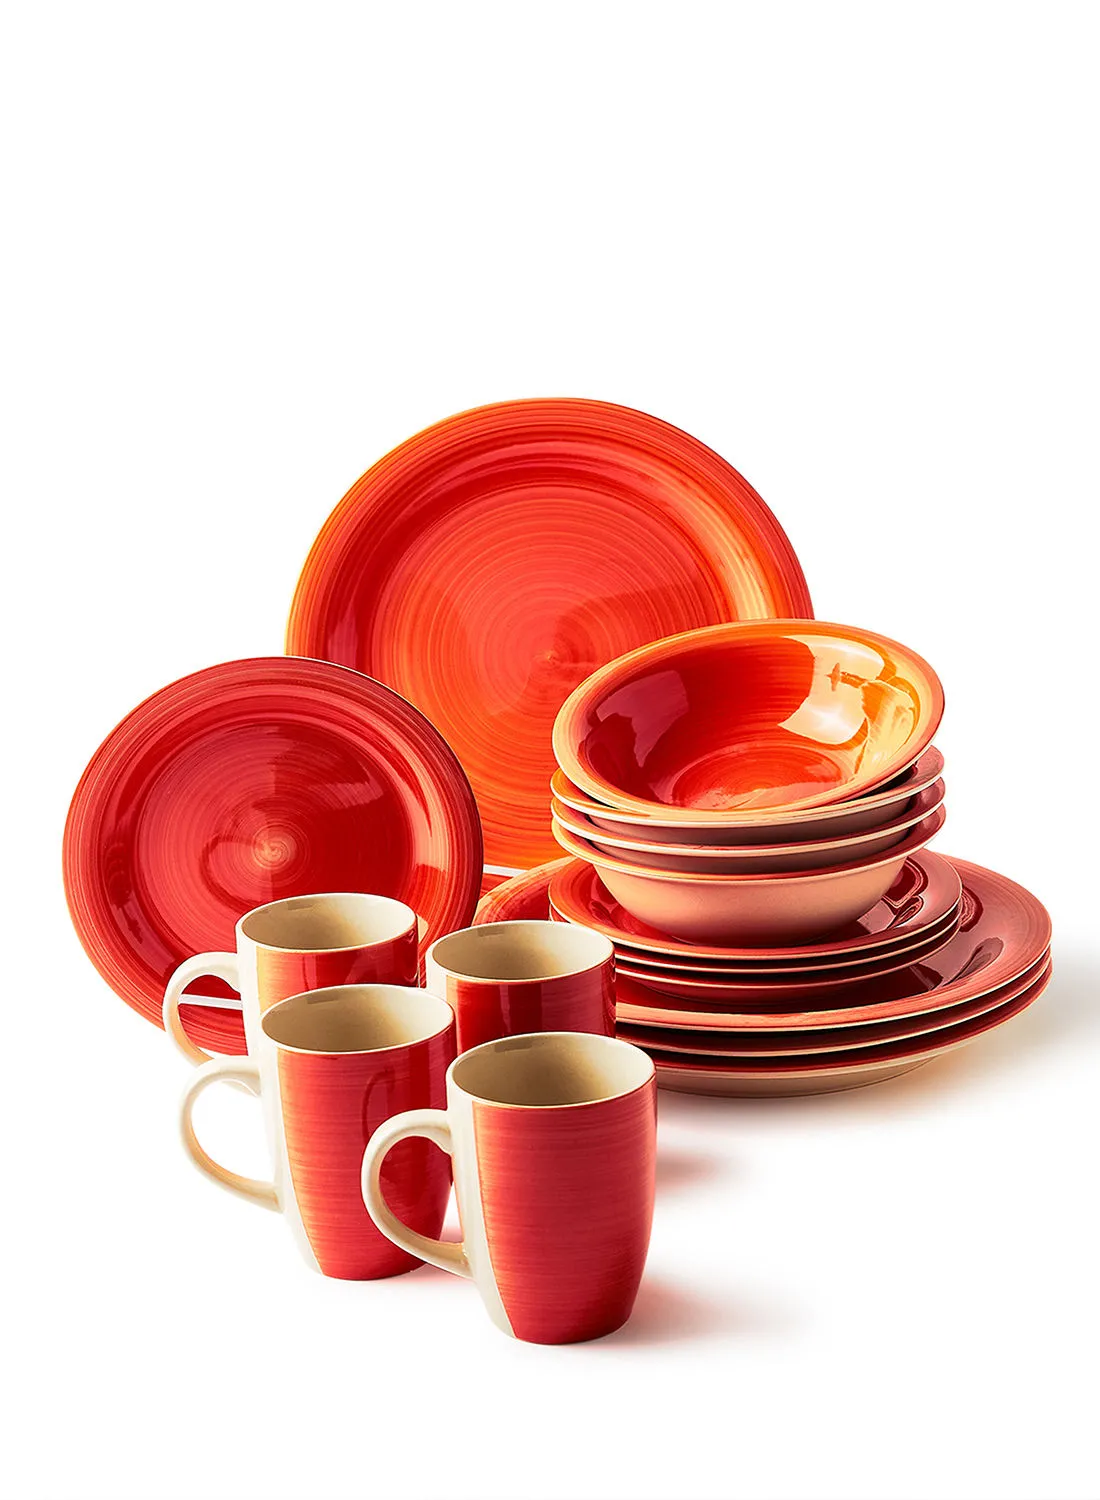 noon east 16 Piece Stoneware Dinner Set - Dishes, Plates - Dinner Plate, Side Plate, Bowl, Mugs - Serves 4 - Red